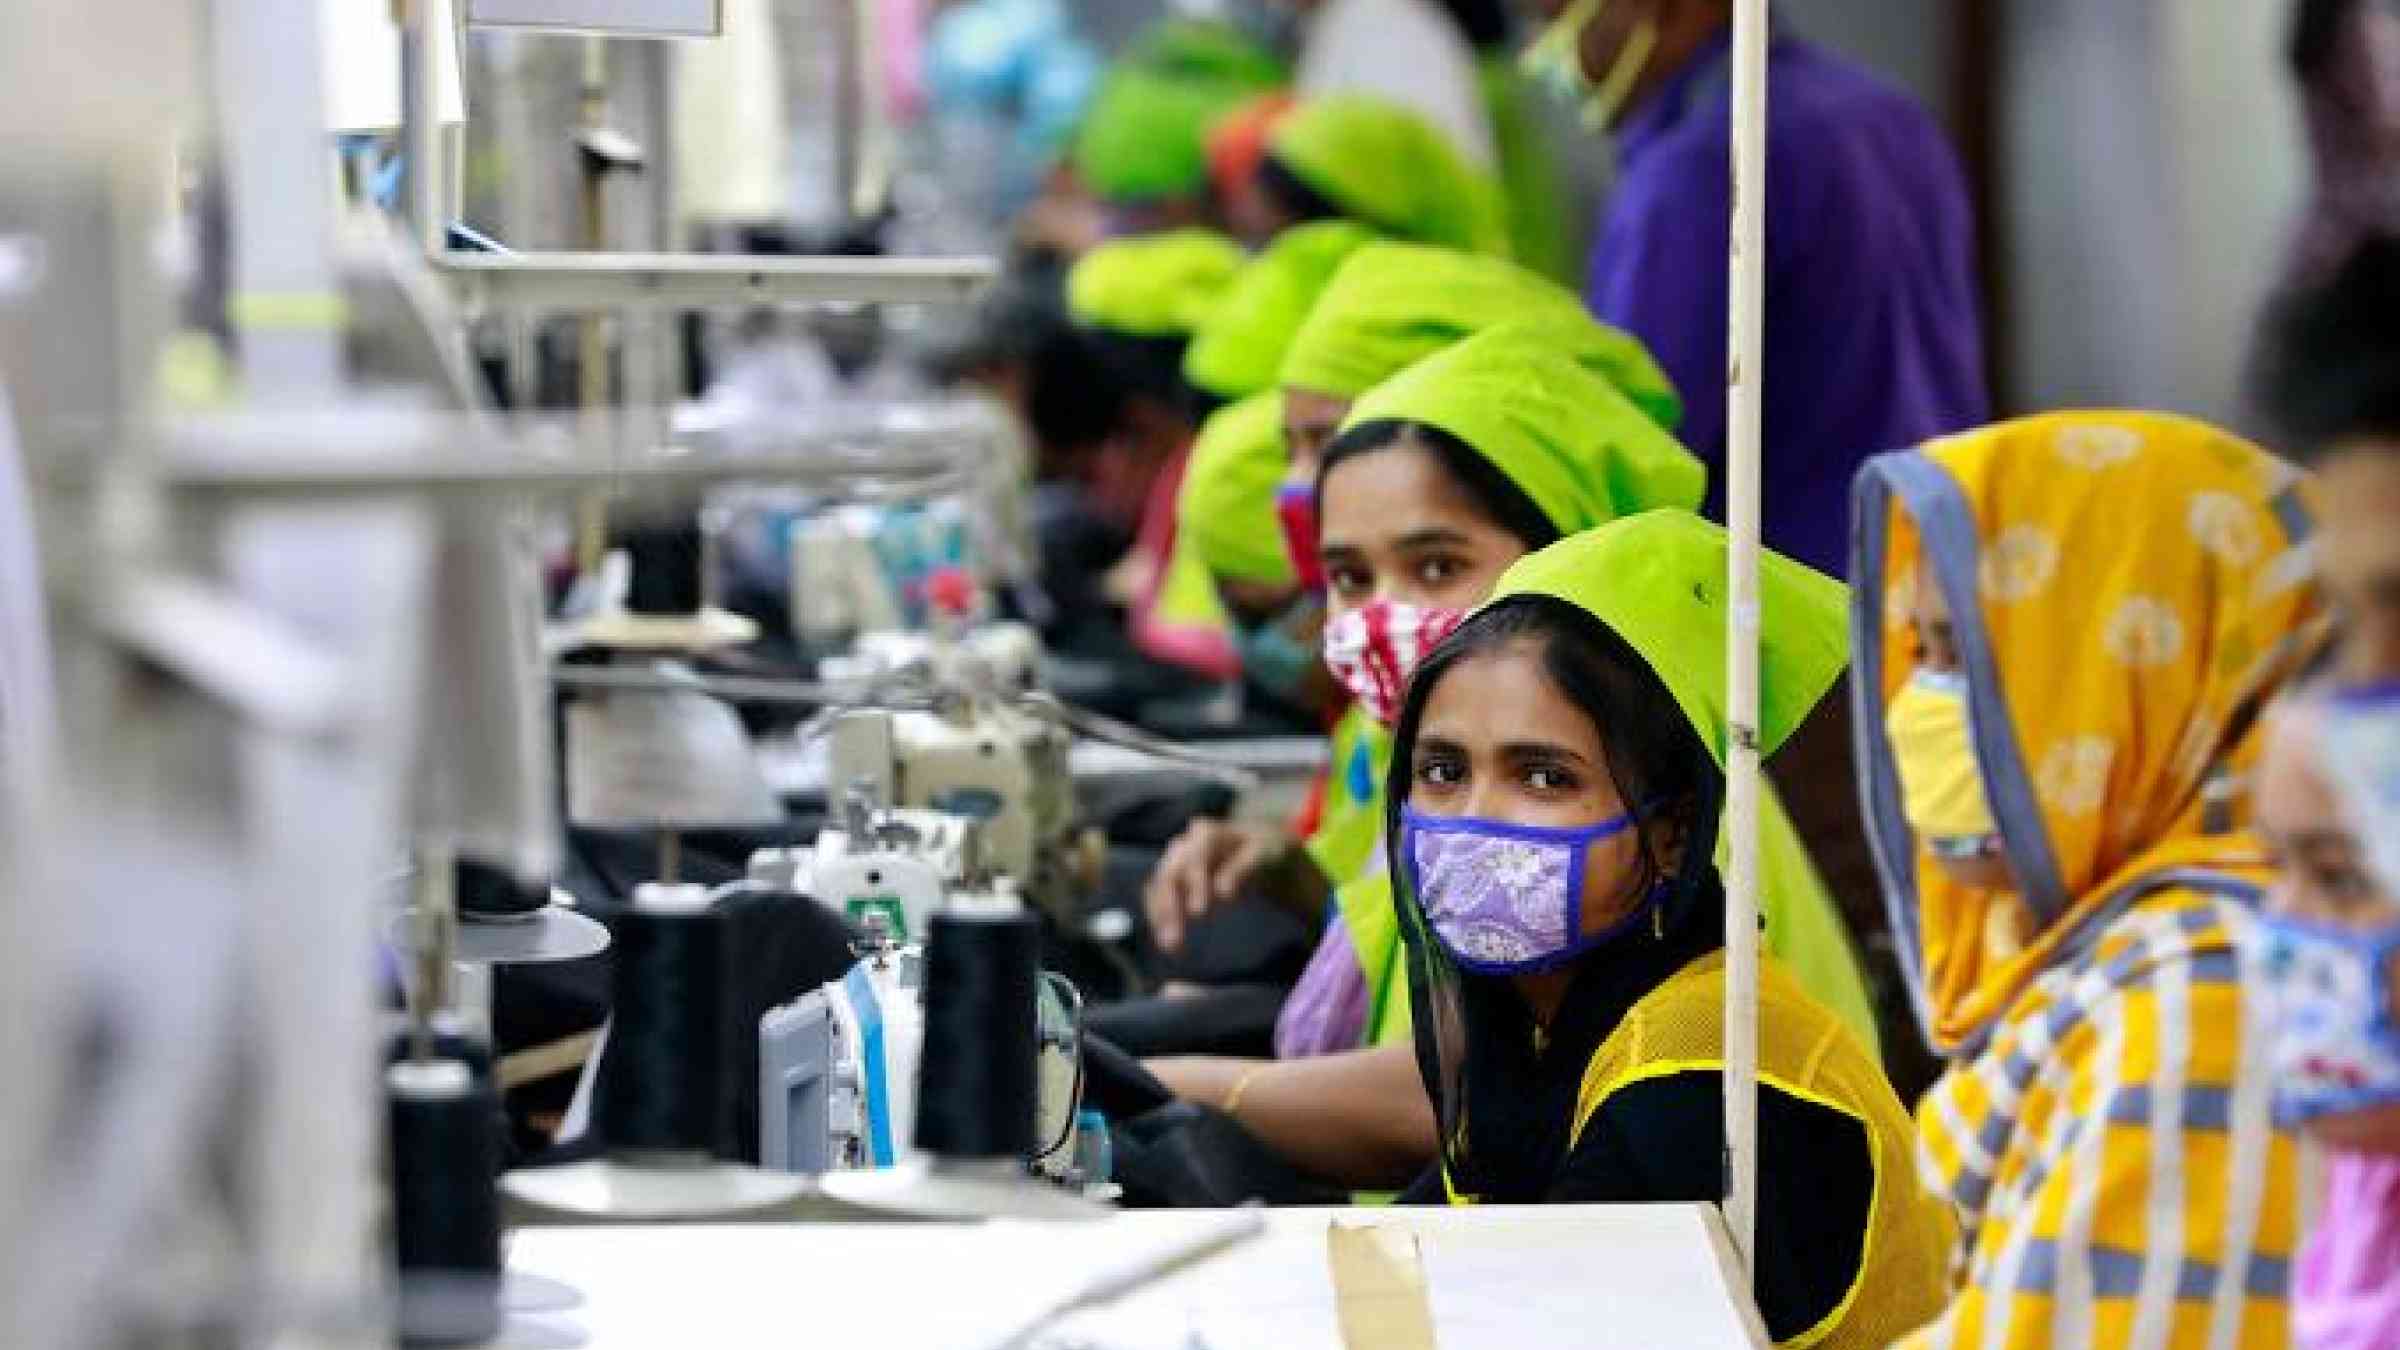 Dhaka, Bangladesh - March 31, 2020: Workers producing personal protective equipment (PPE) for health professionals at a garment factory of Urmi Group. Sk Hasan Ali / Shutterstock.com